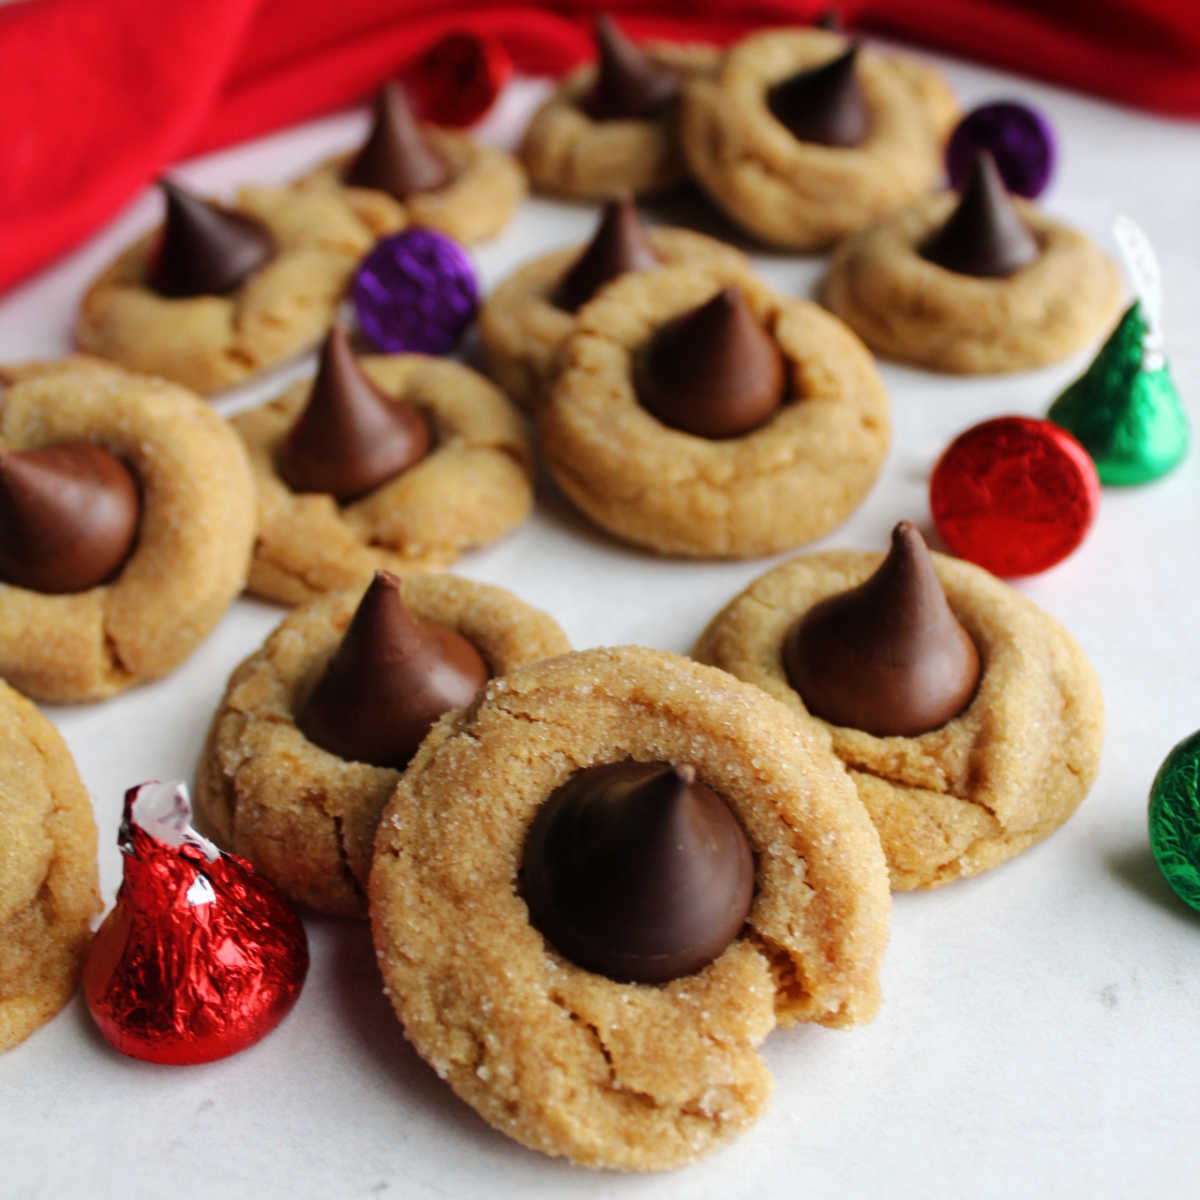 Soft peanut butter blossoms with different Kisses in the center including milk chocolate, dark chocolate, and caramel filled with some wrapped Hershey's Kisses nearby.